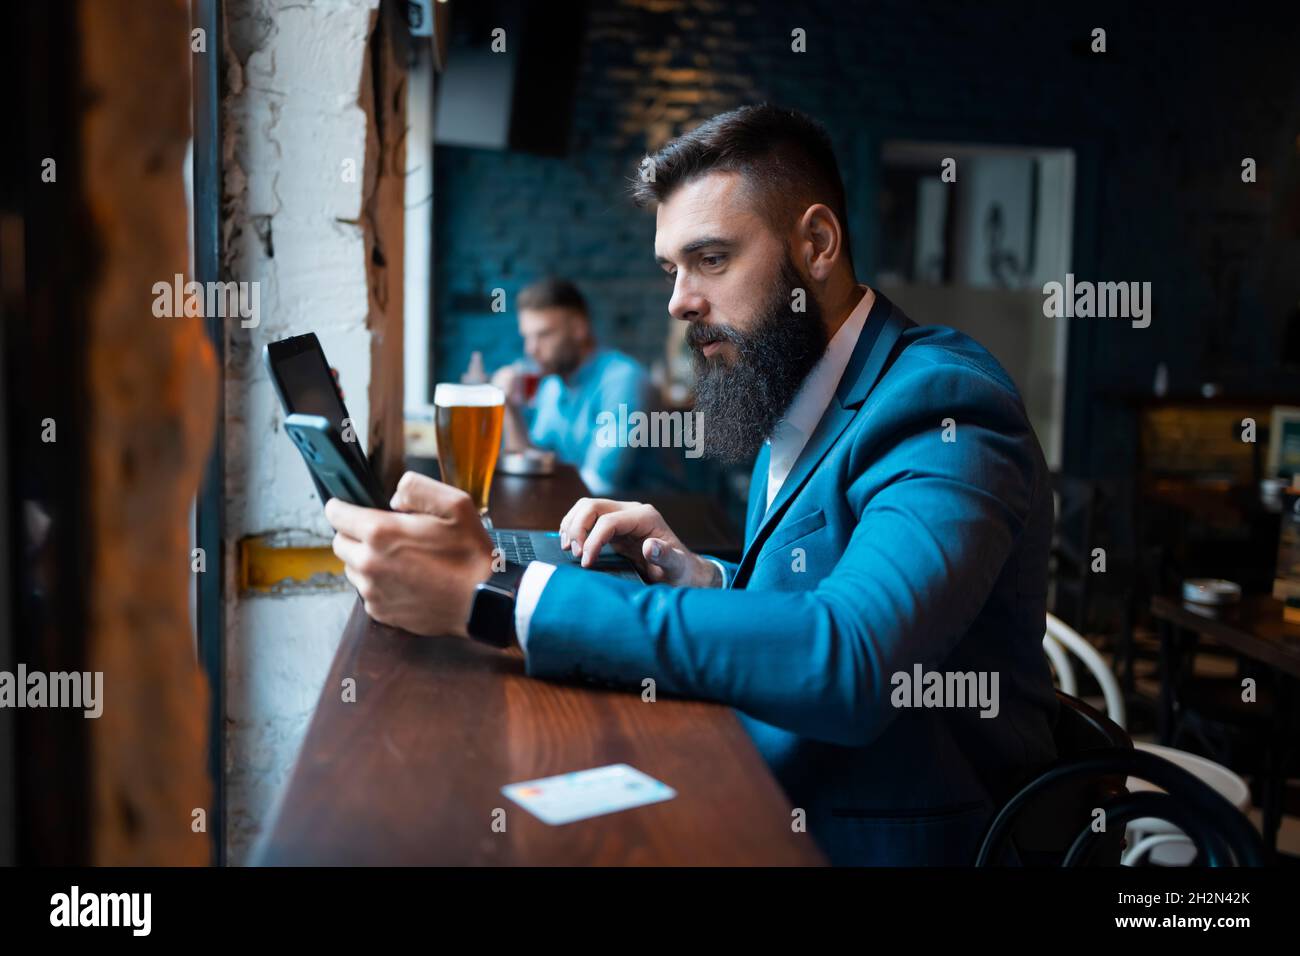 Young businessman using his smartphone in a bar Stock Photo